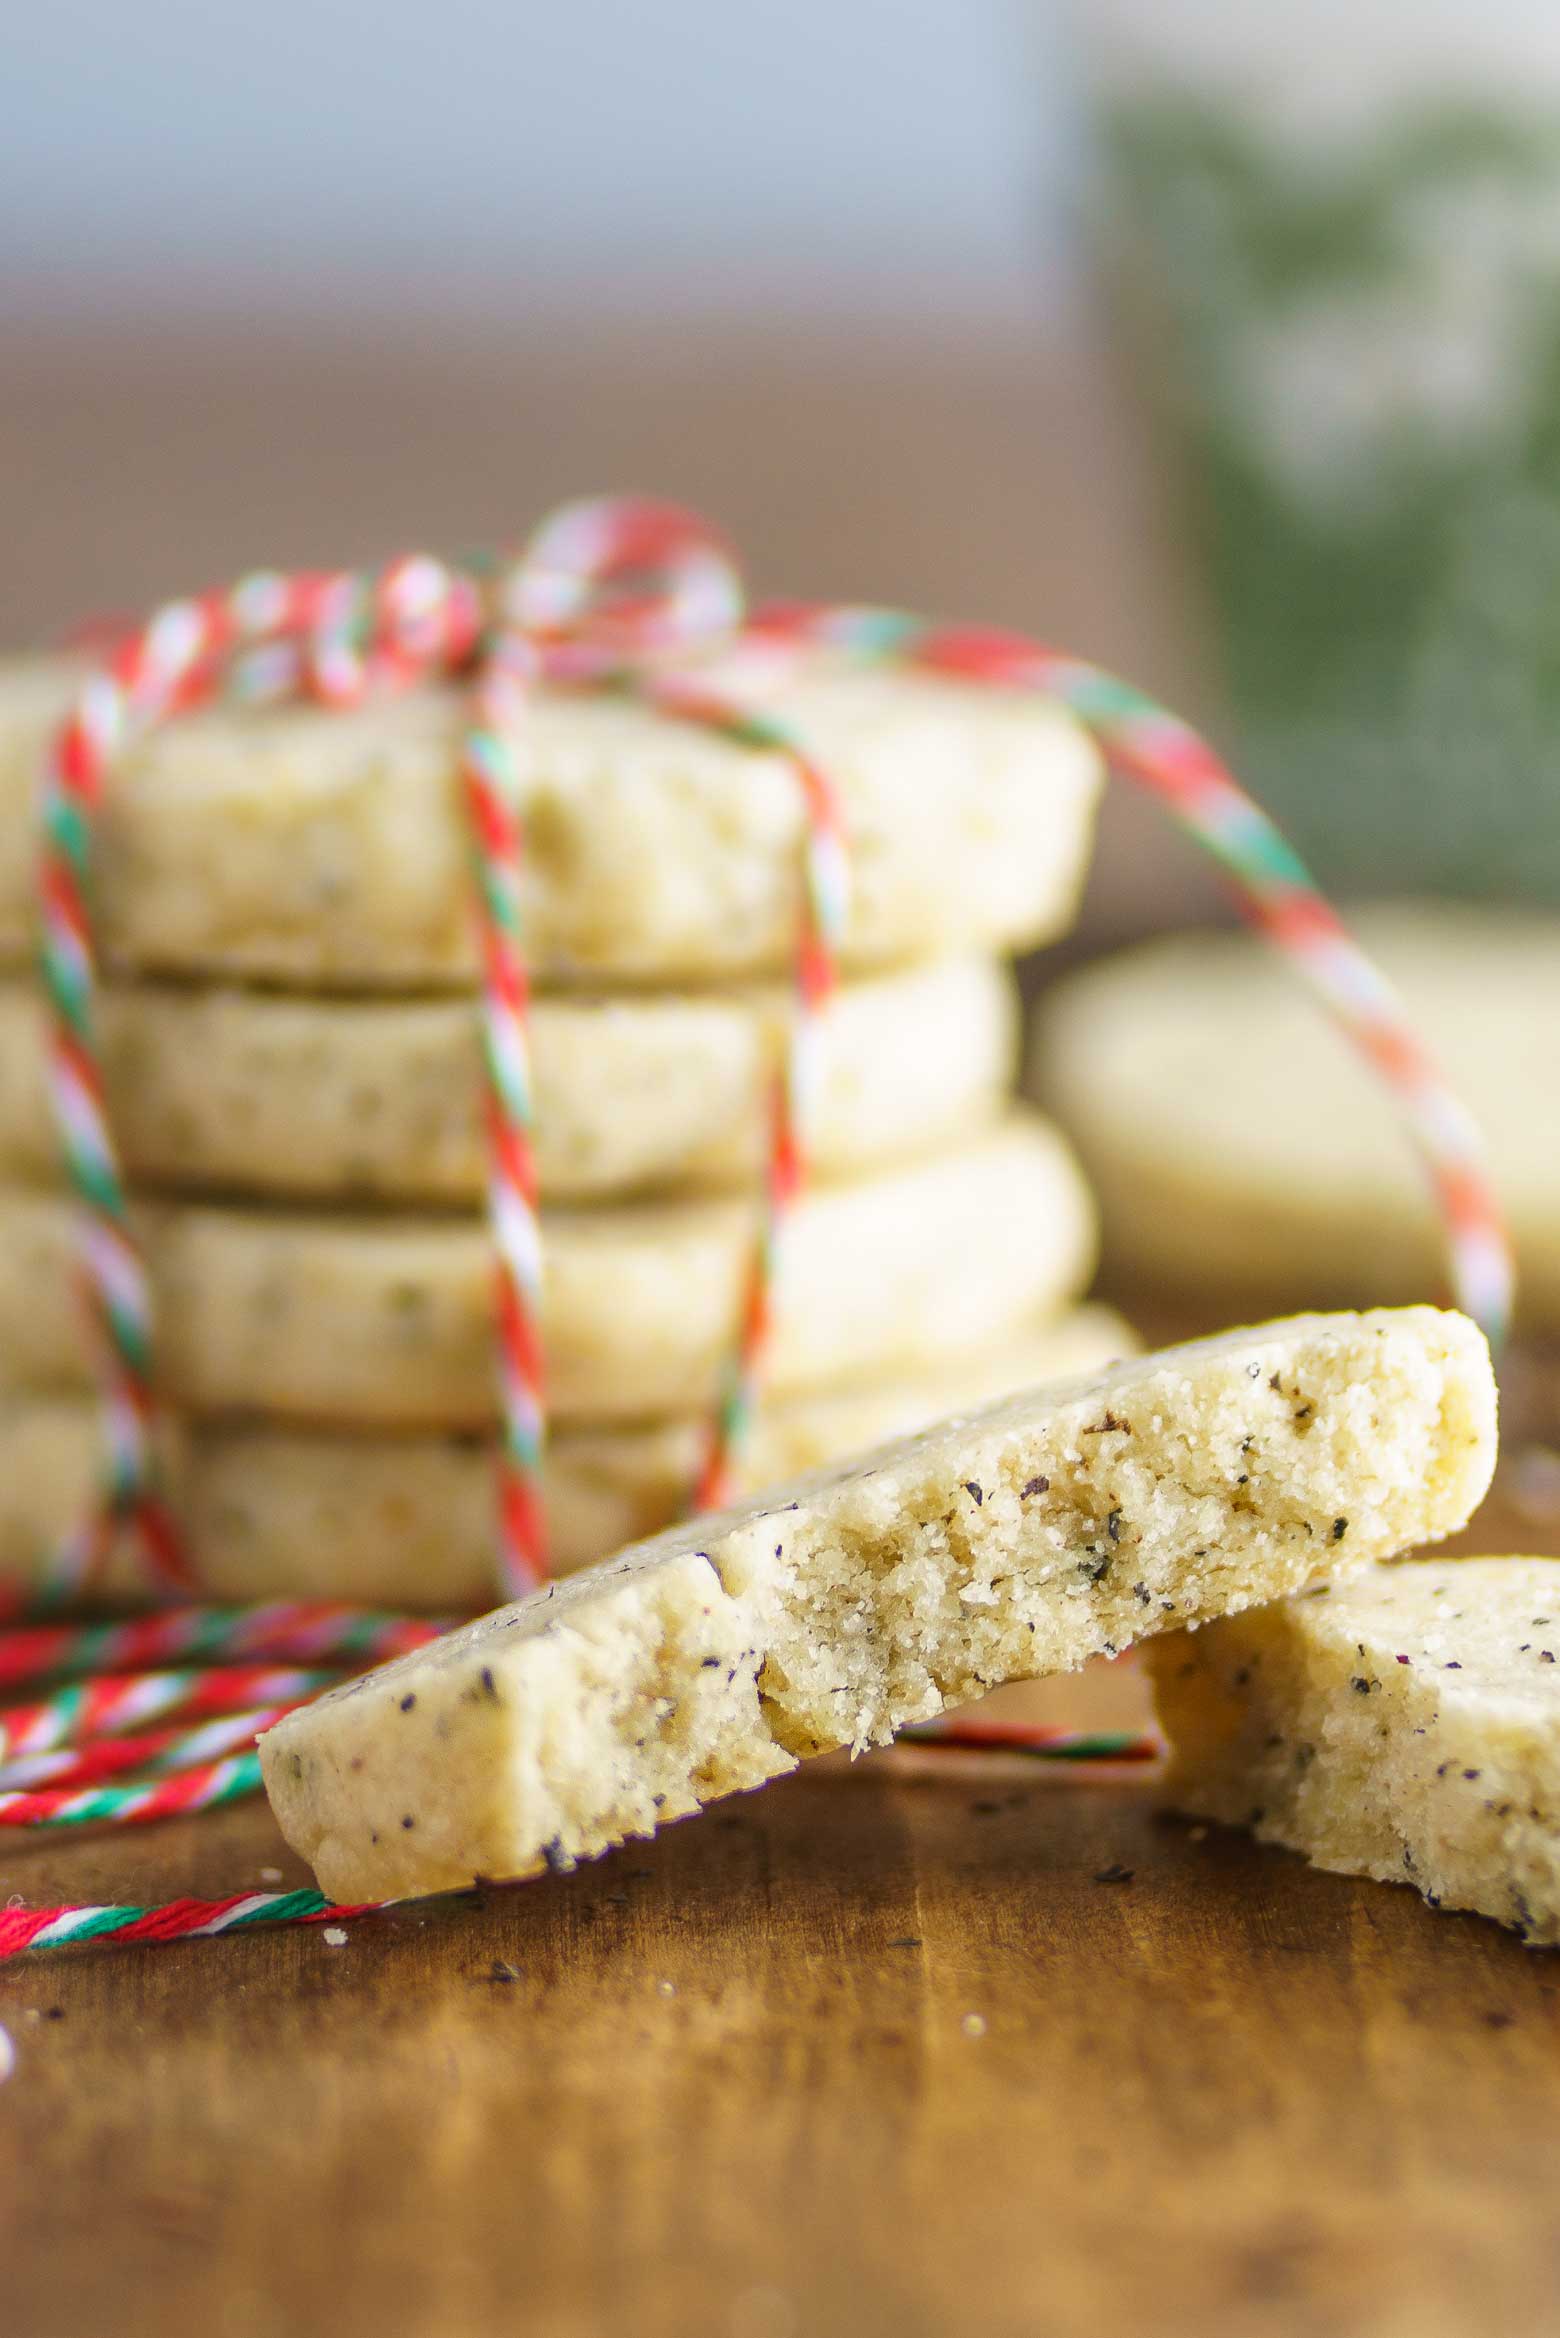 https://www.majhofftakesawife.com/wp-content/uploads/2019/12/up-close-of-spiced-shortbread.jpg